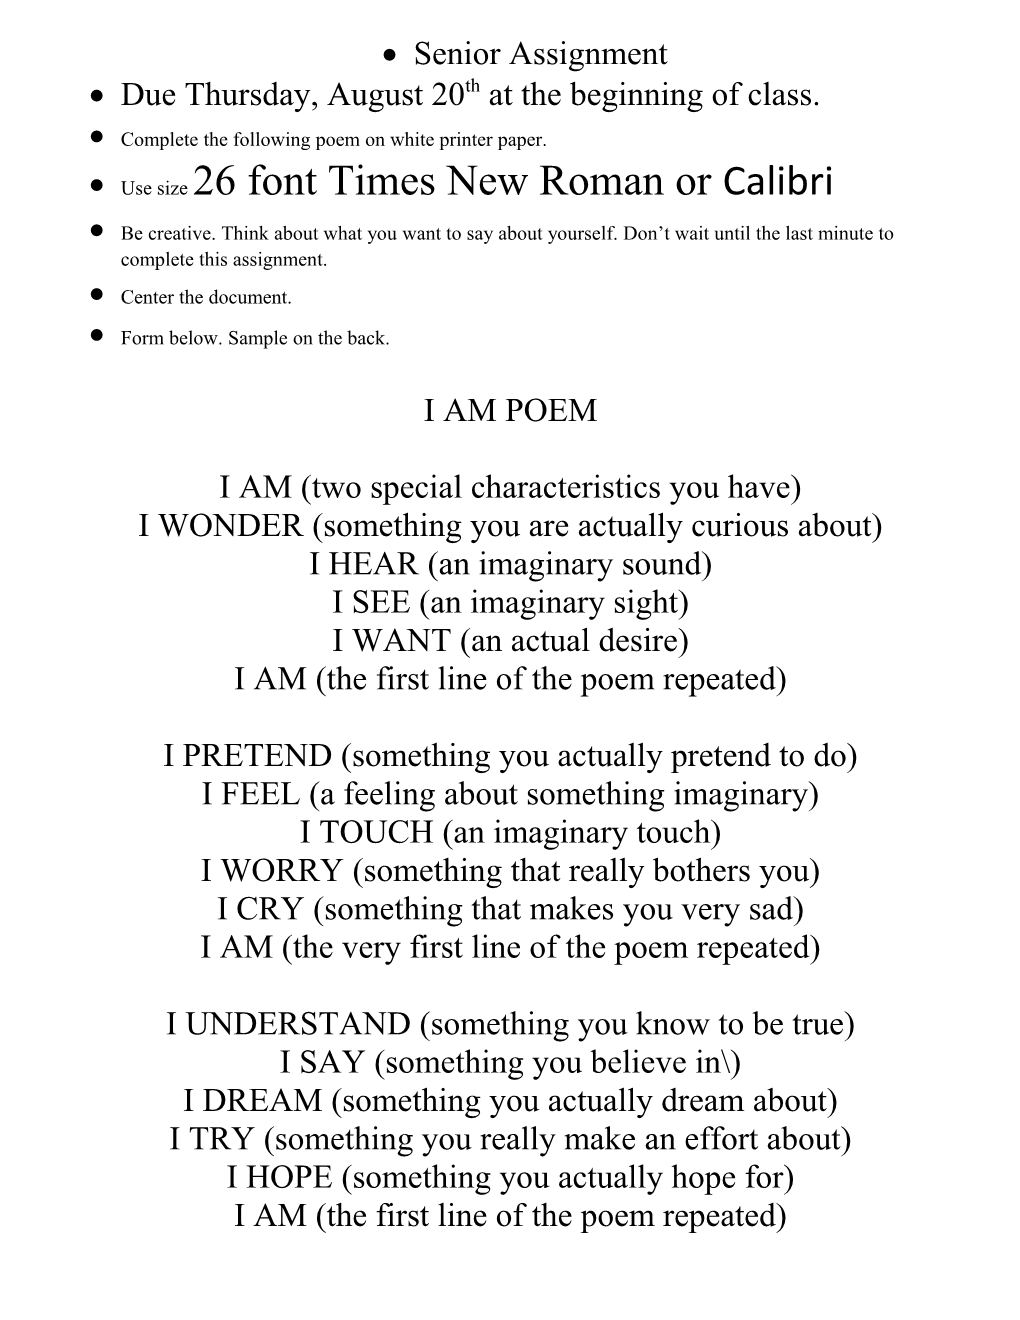 Complete the Following Poem on White Printer Paper